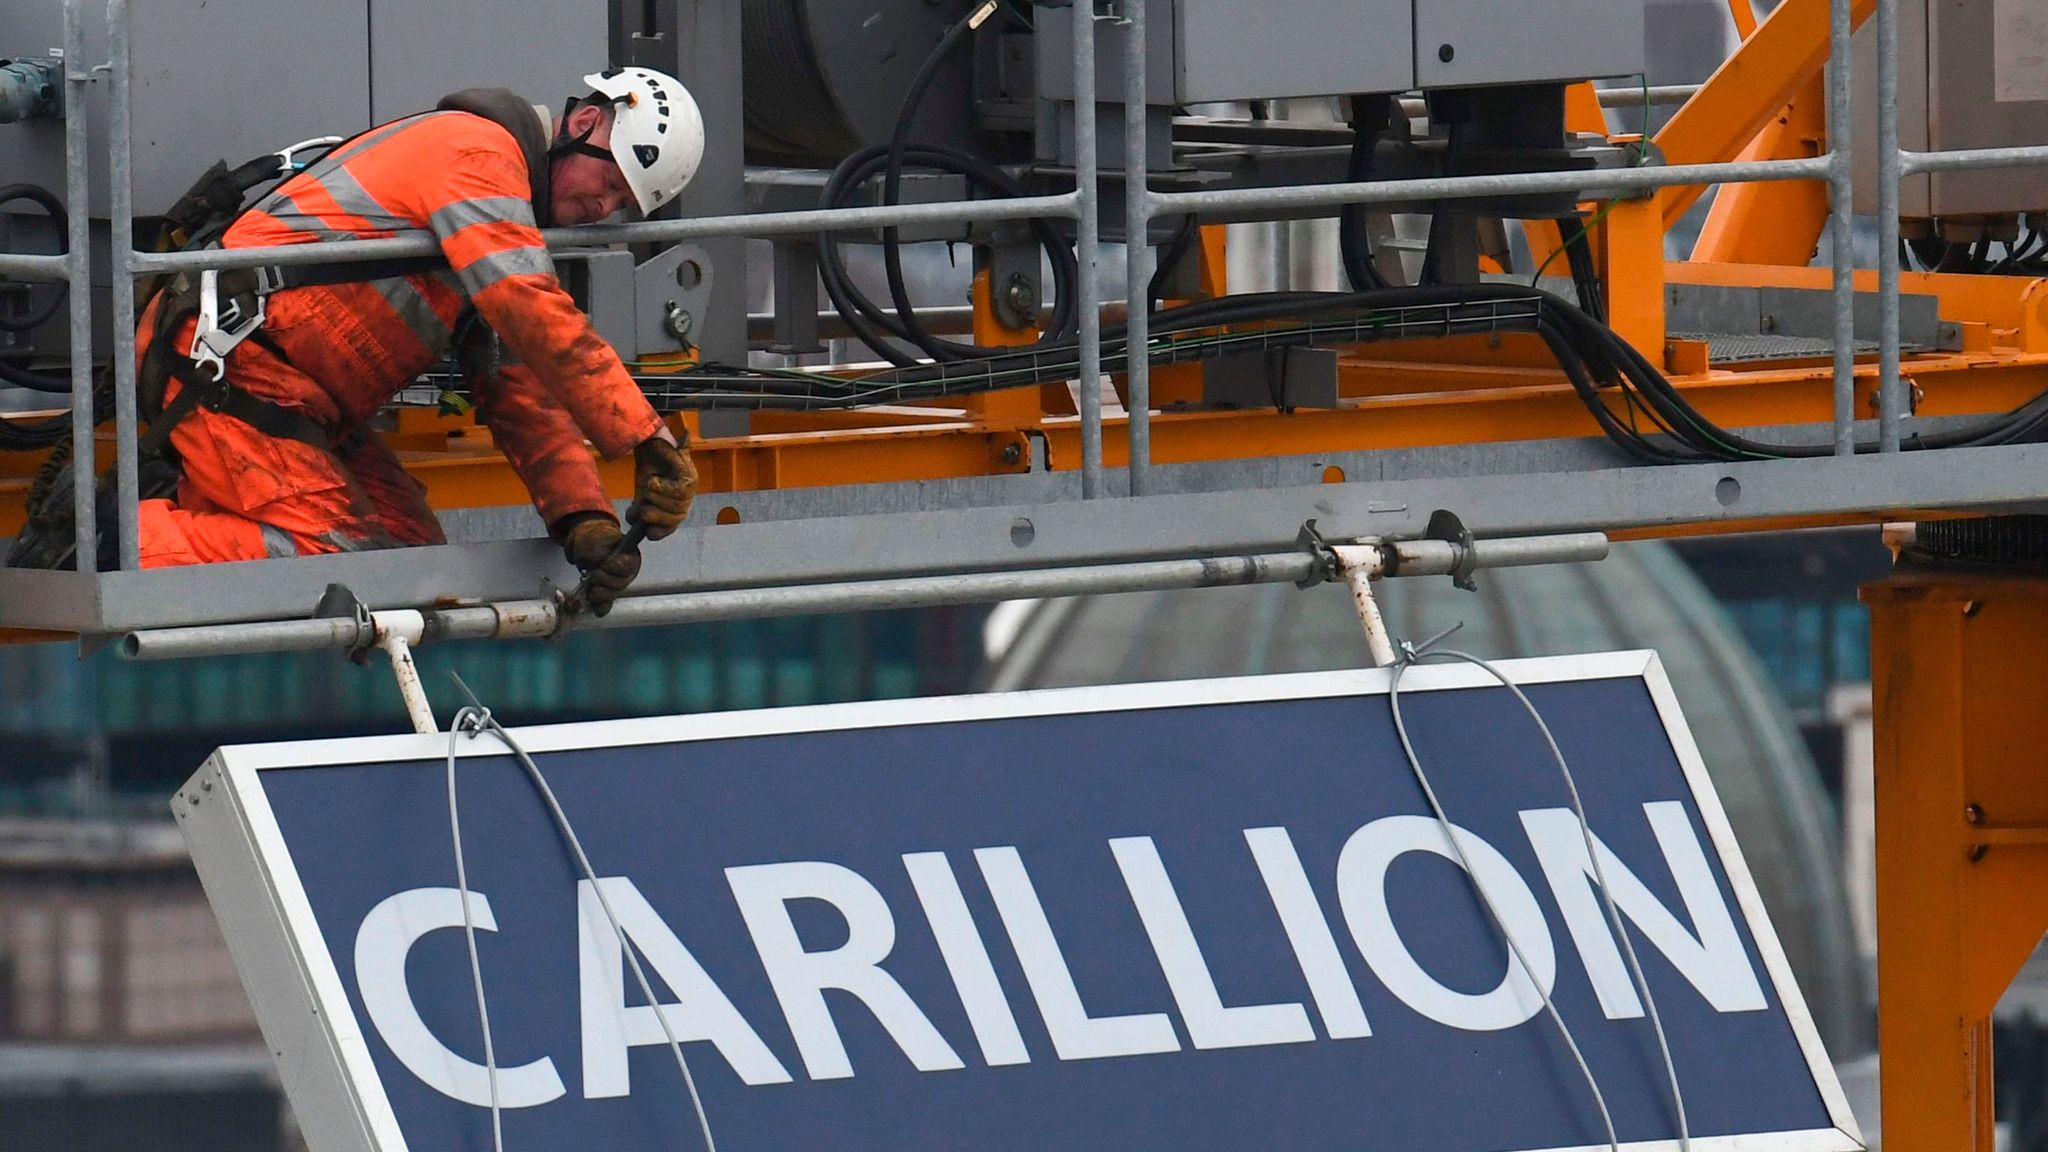 What are the Likely Effects of Carillion's Insolvency on its Supply Chain?